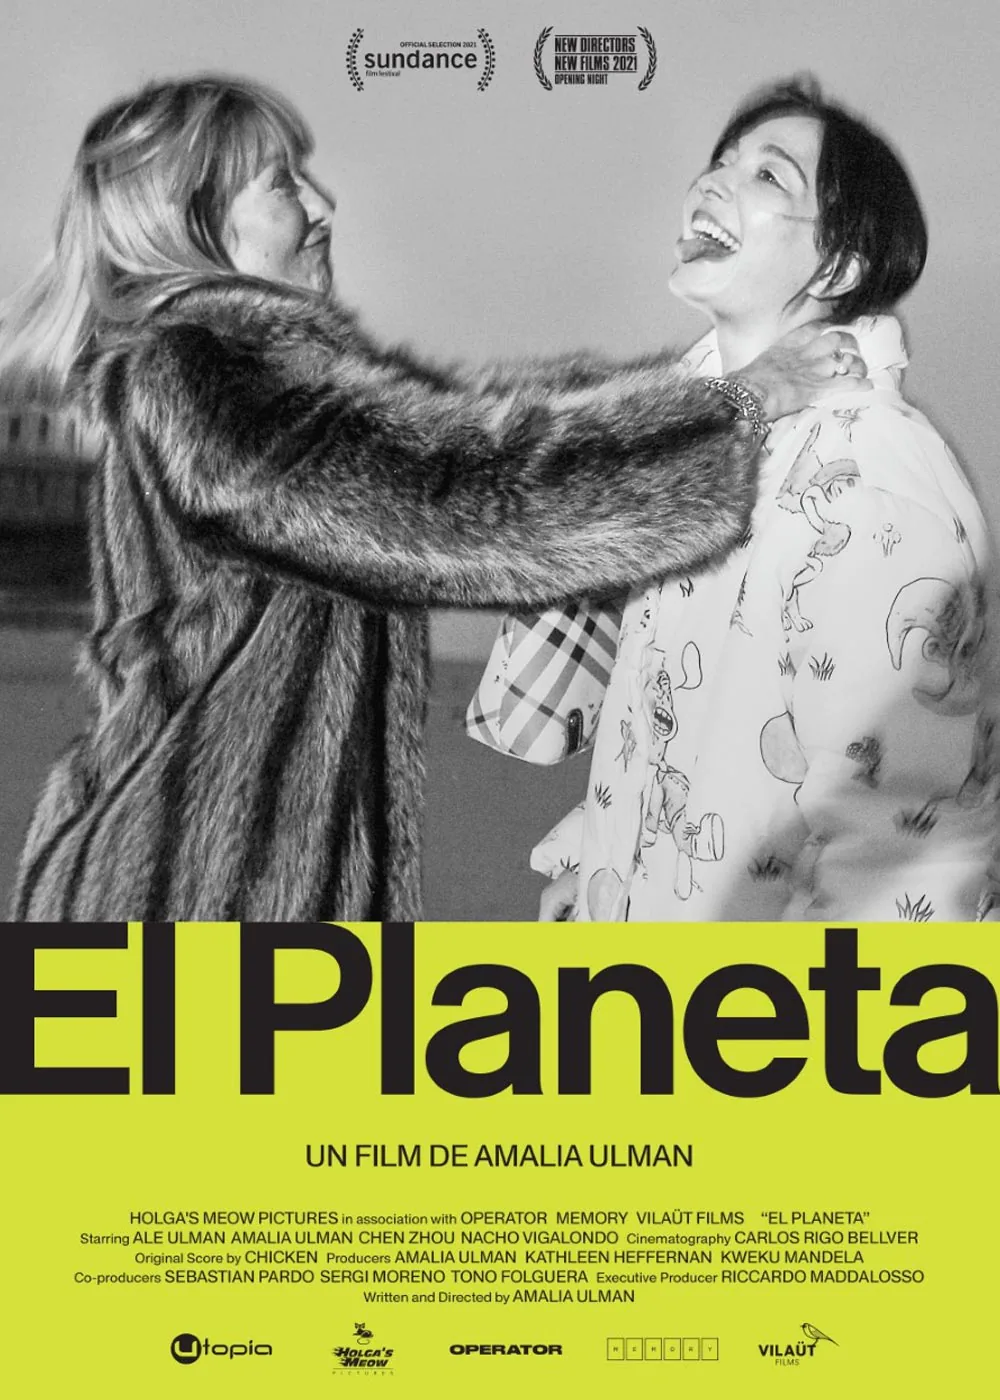  El Planeta Movie 2022, Official Trailer, Release Date, HD Poster 